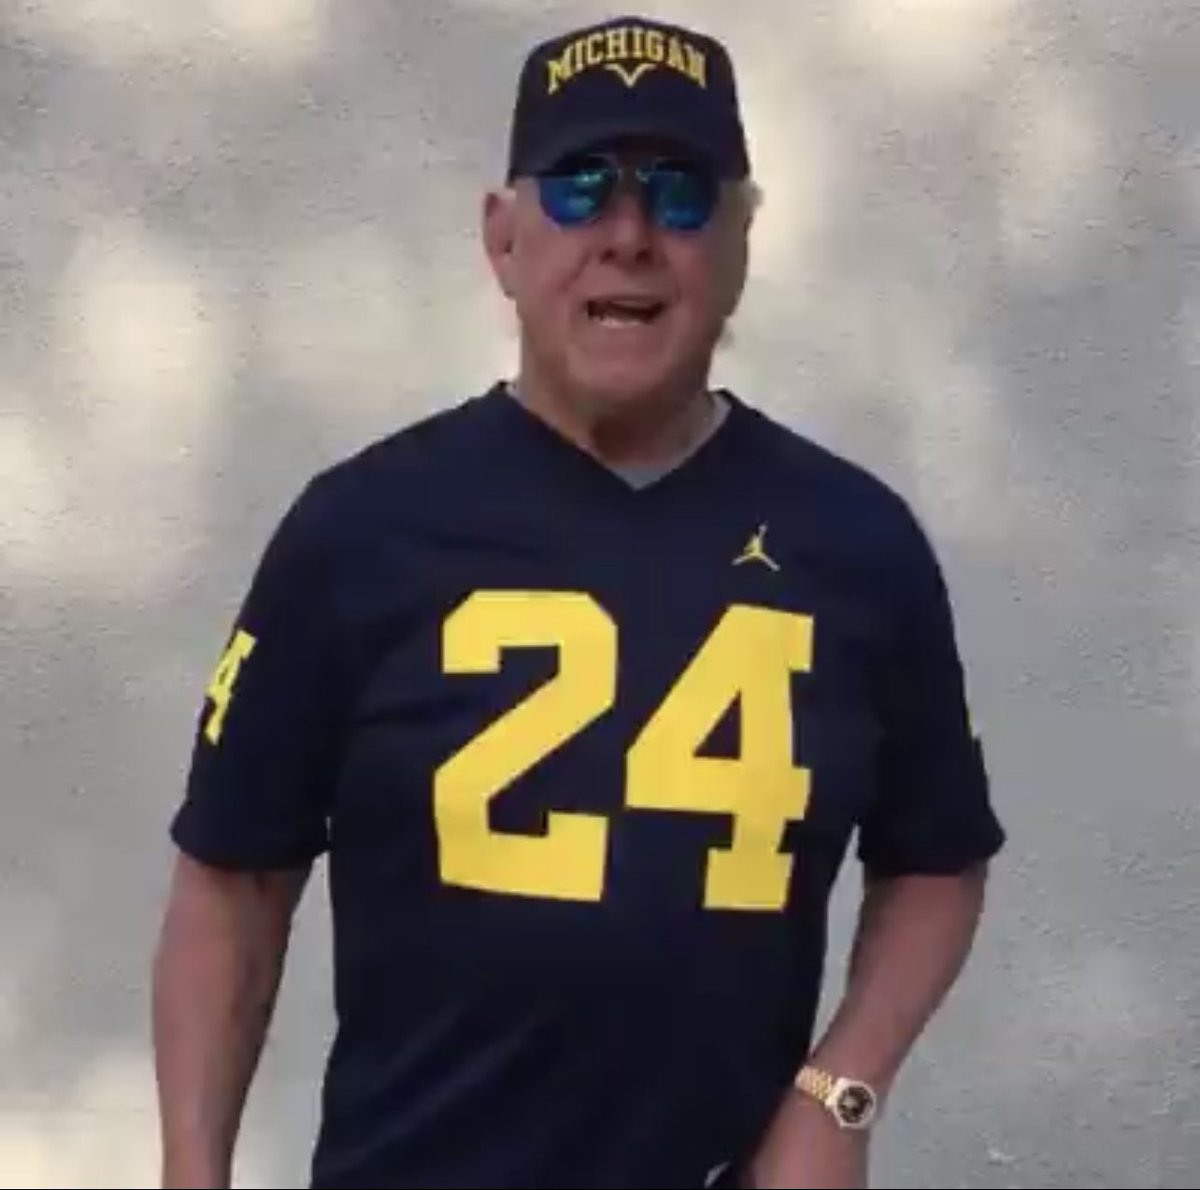 Now On To The Post For My Real Team: Go BLUE! To Be The Team, You Gotta Beat The Team, And @UMichFootball, You Are The Team! Let’s Keep Up The Momentum! WOOOOO!